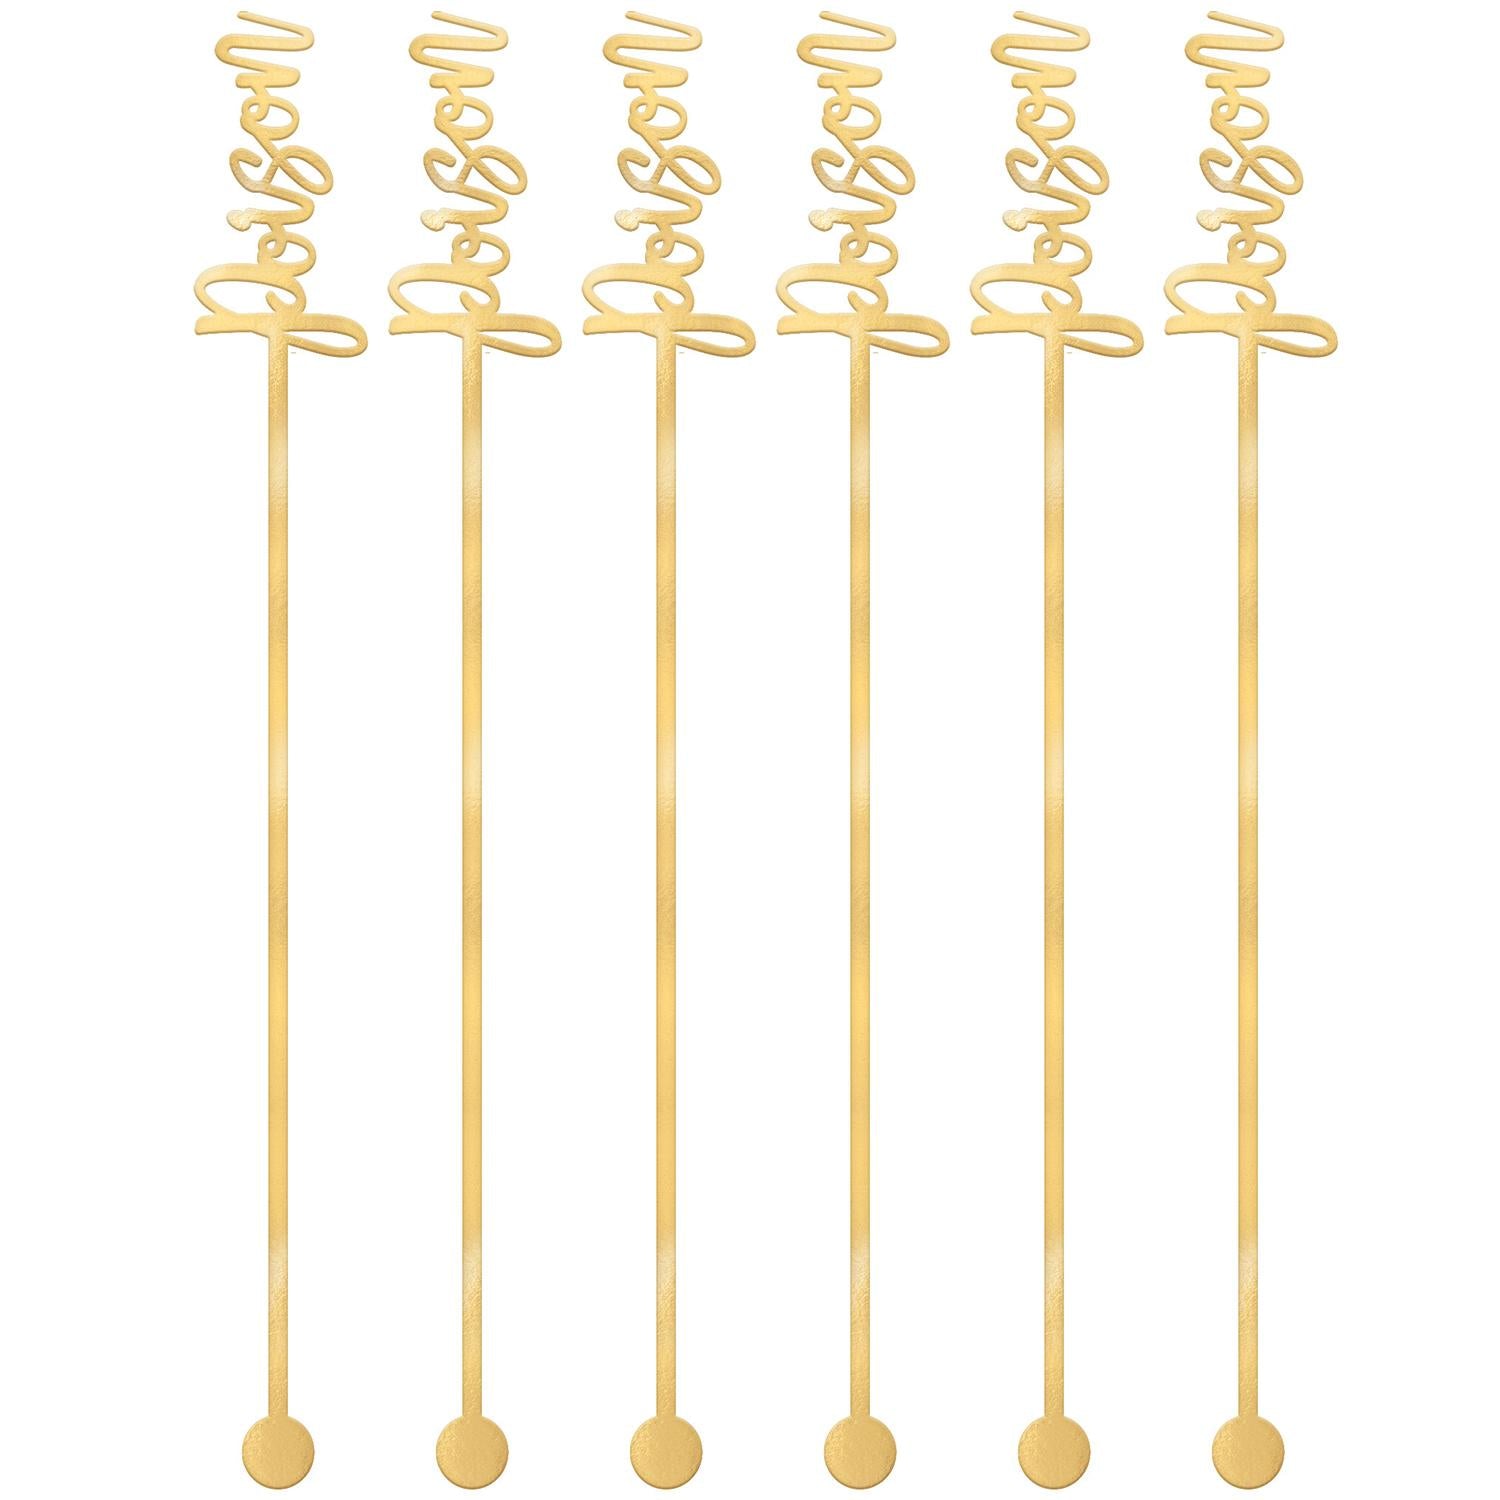 Poison Electroplated Plastic Drink Stirrers 7.5in, 12pcs Candy Buffet - Party Centre